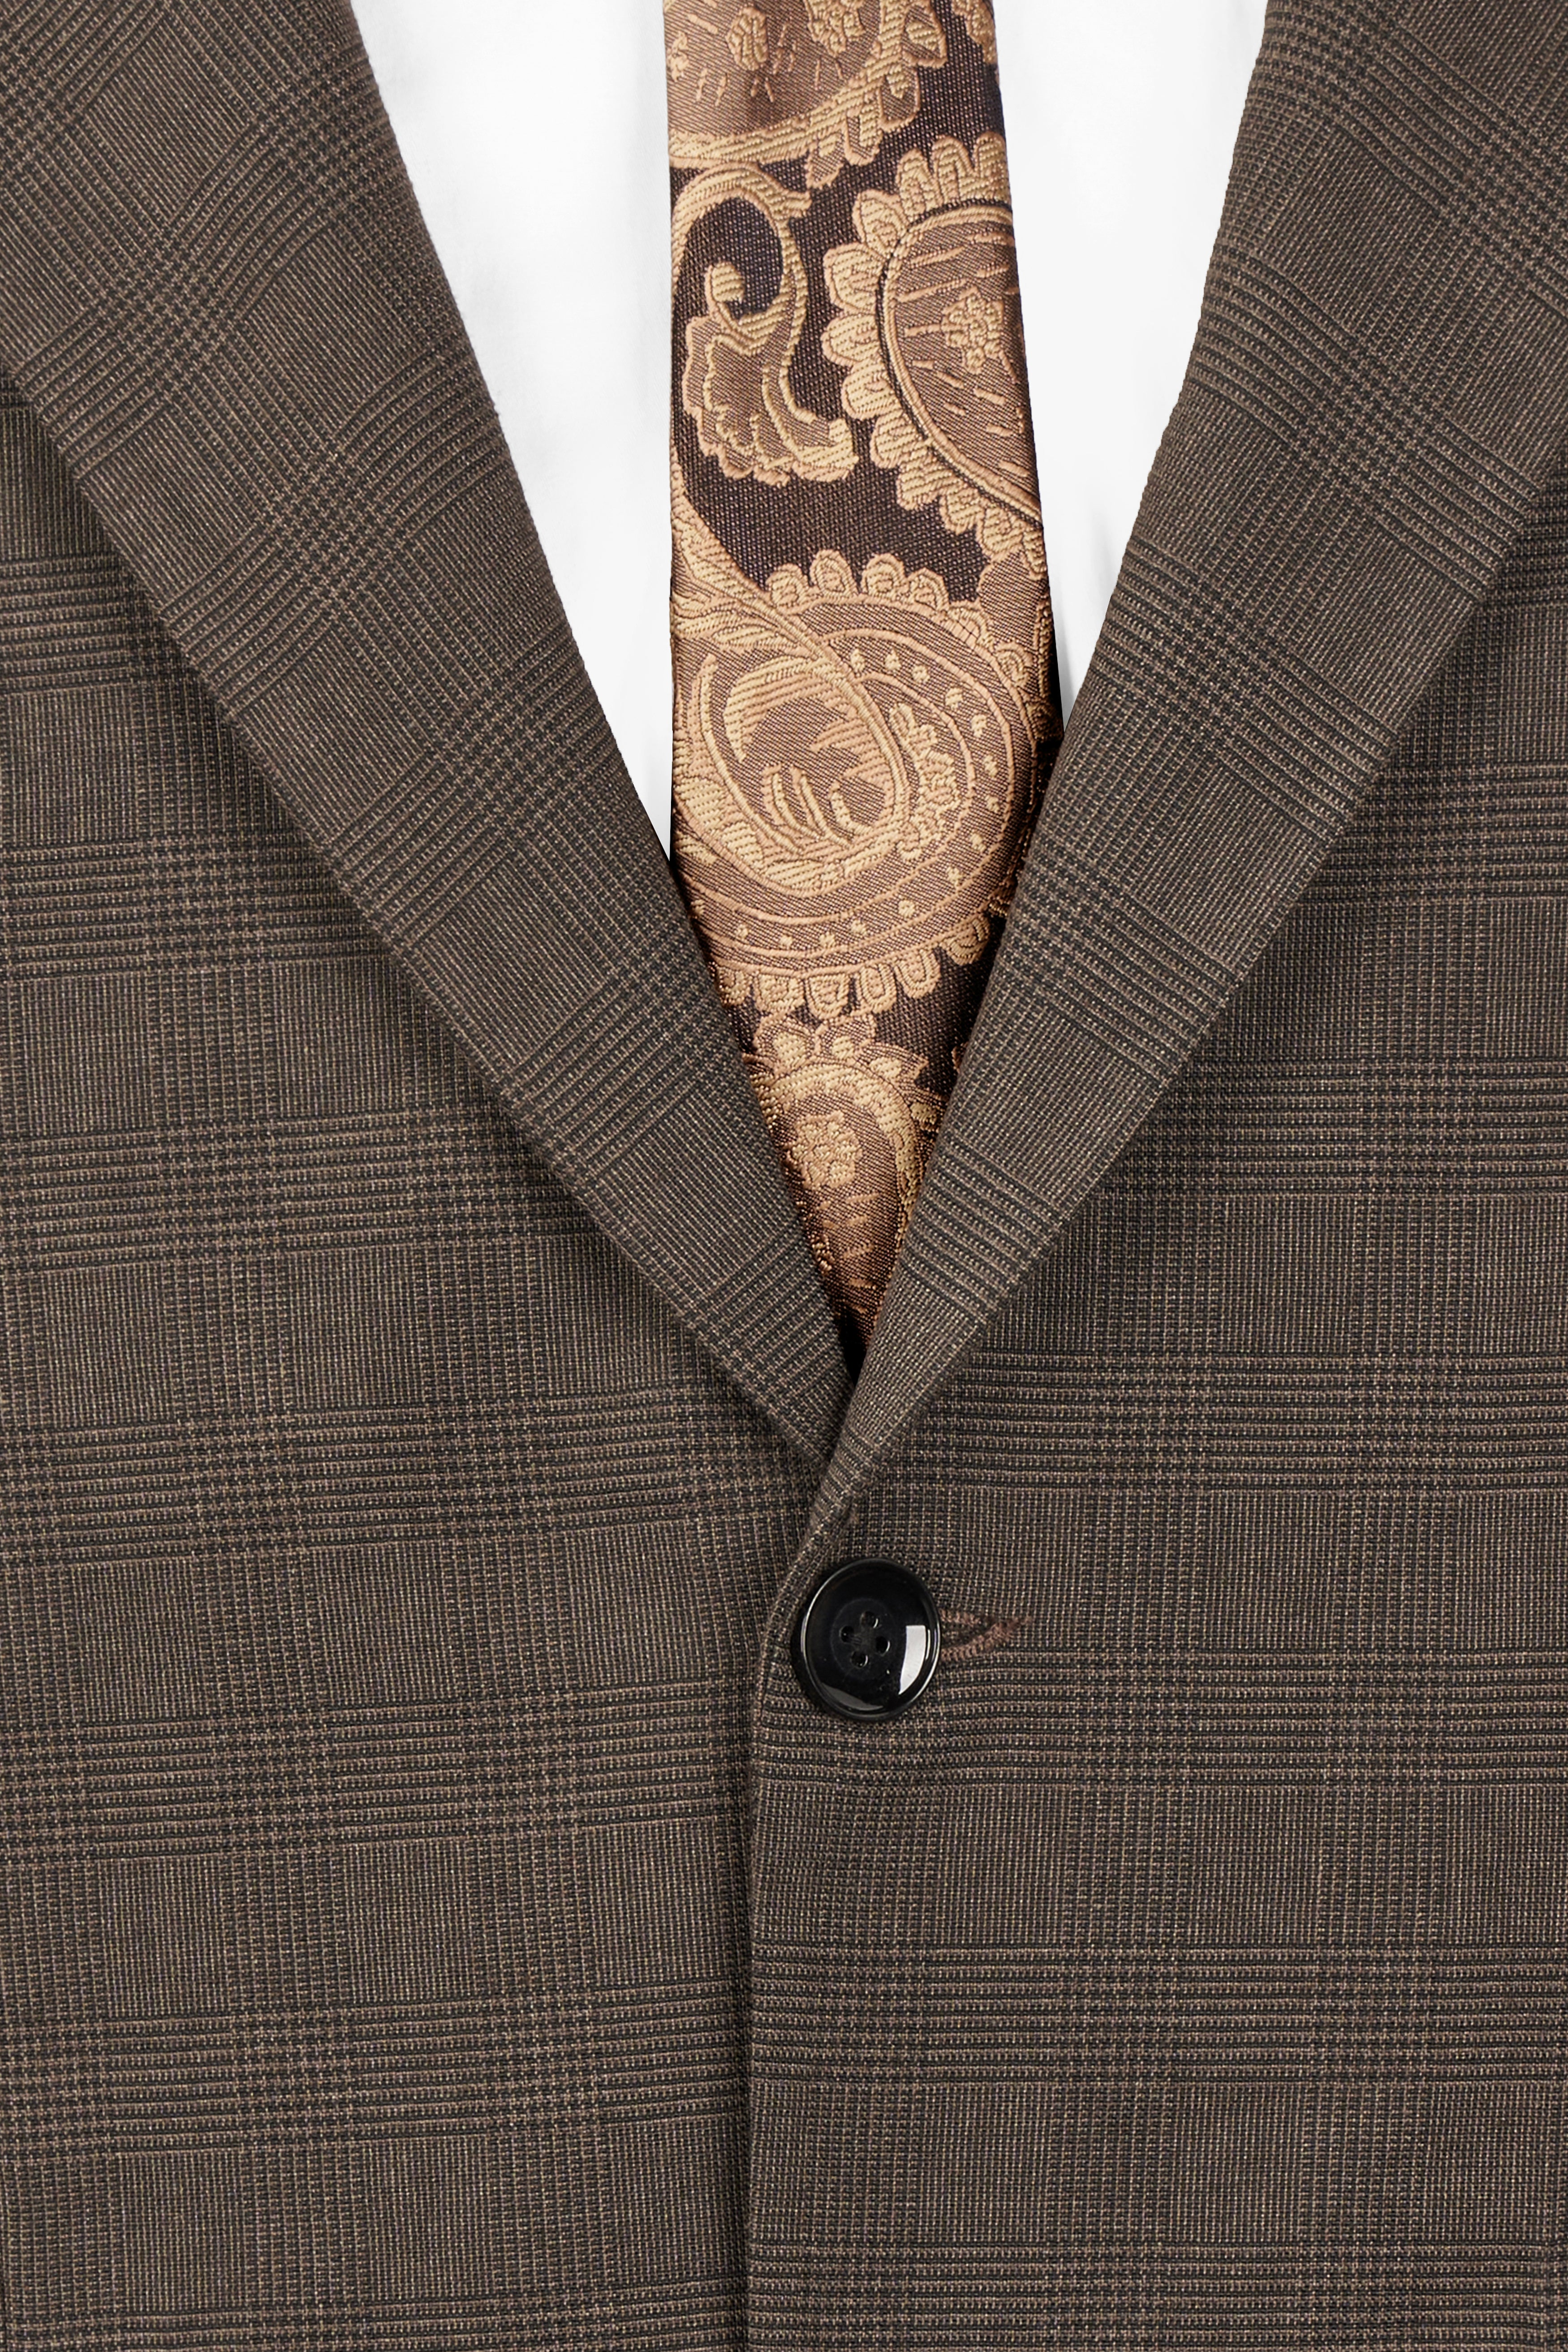 Taupe Coffee Brown Single-Breasted Blazer BL2703-SB-36, BL2703-SB-38, BL2703-SB-40, BL2703-SB-42, BL2703-SB-44, BL2703-SB-46, BL2703-SB-48, BL2703-SB-50, BL2703-SB-52, BL2703-SB-54, BL2703-SB-56, BL2703-SB-58, BL2703-SB-60